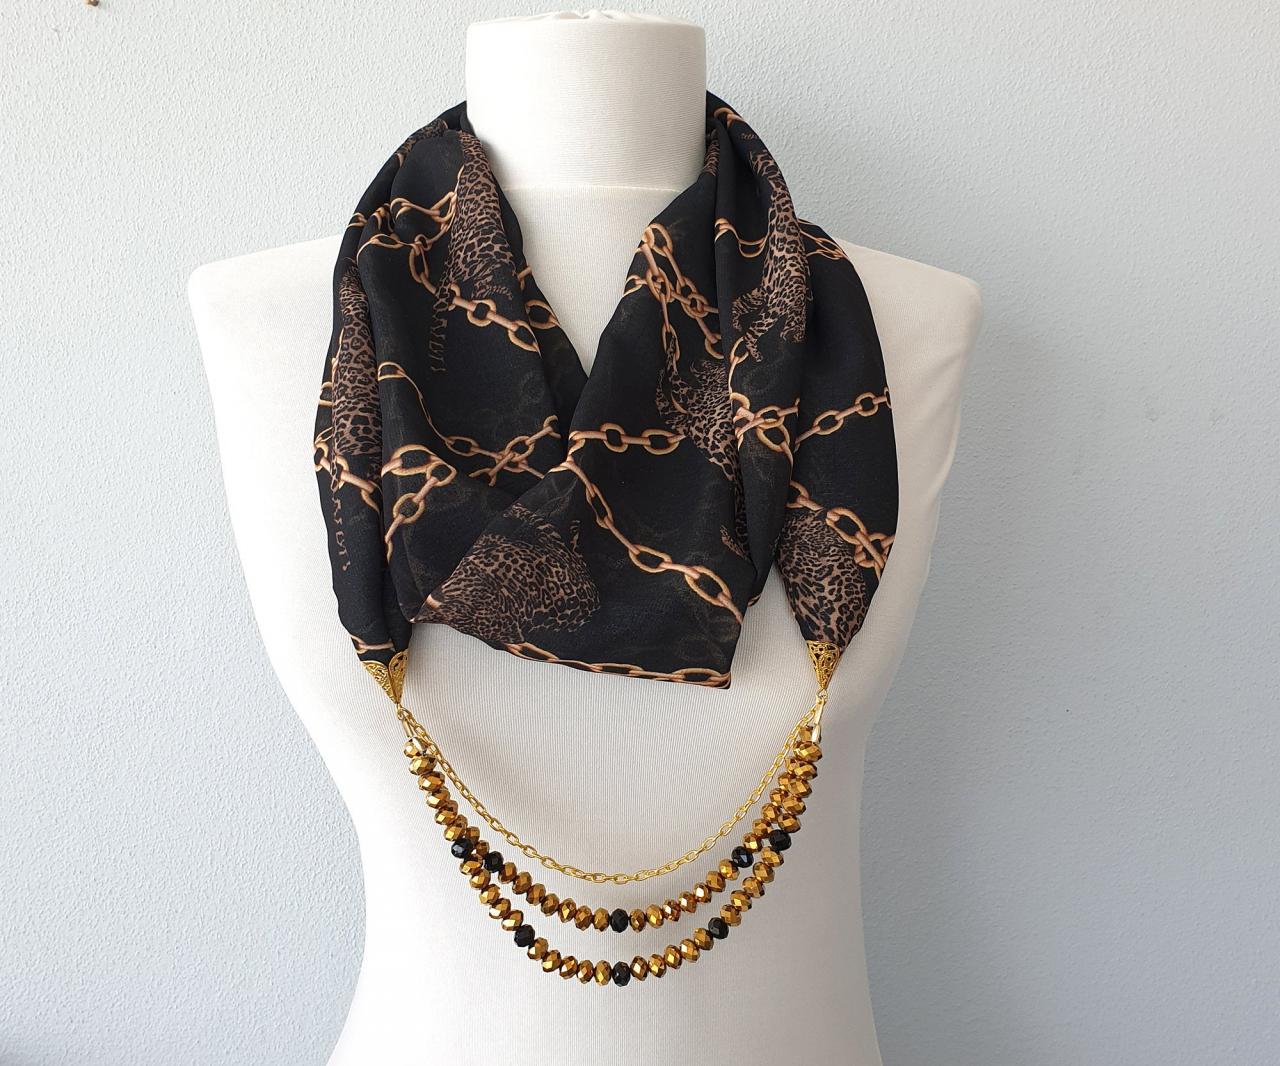 Black Gold Necklace Scarf, Leopard And Chain Print In Gold, Animal Print Accessories